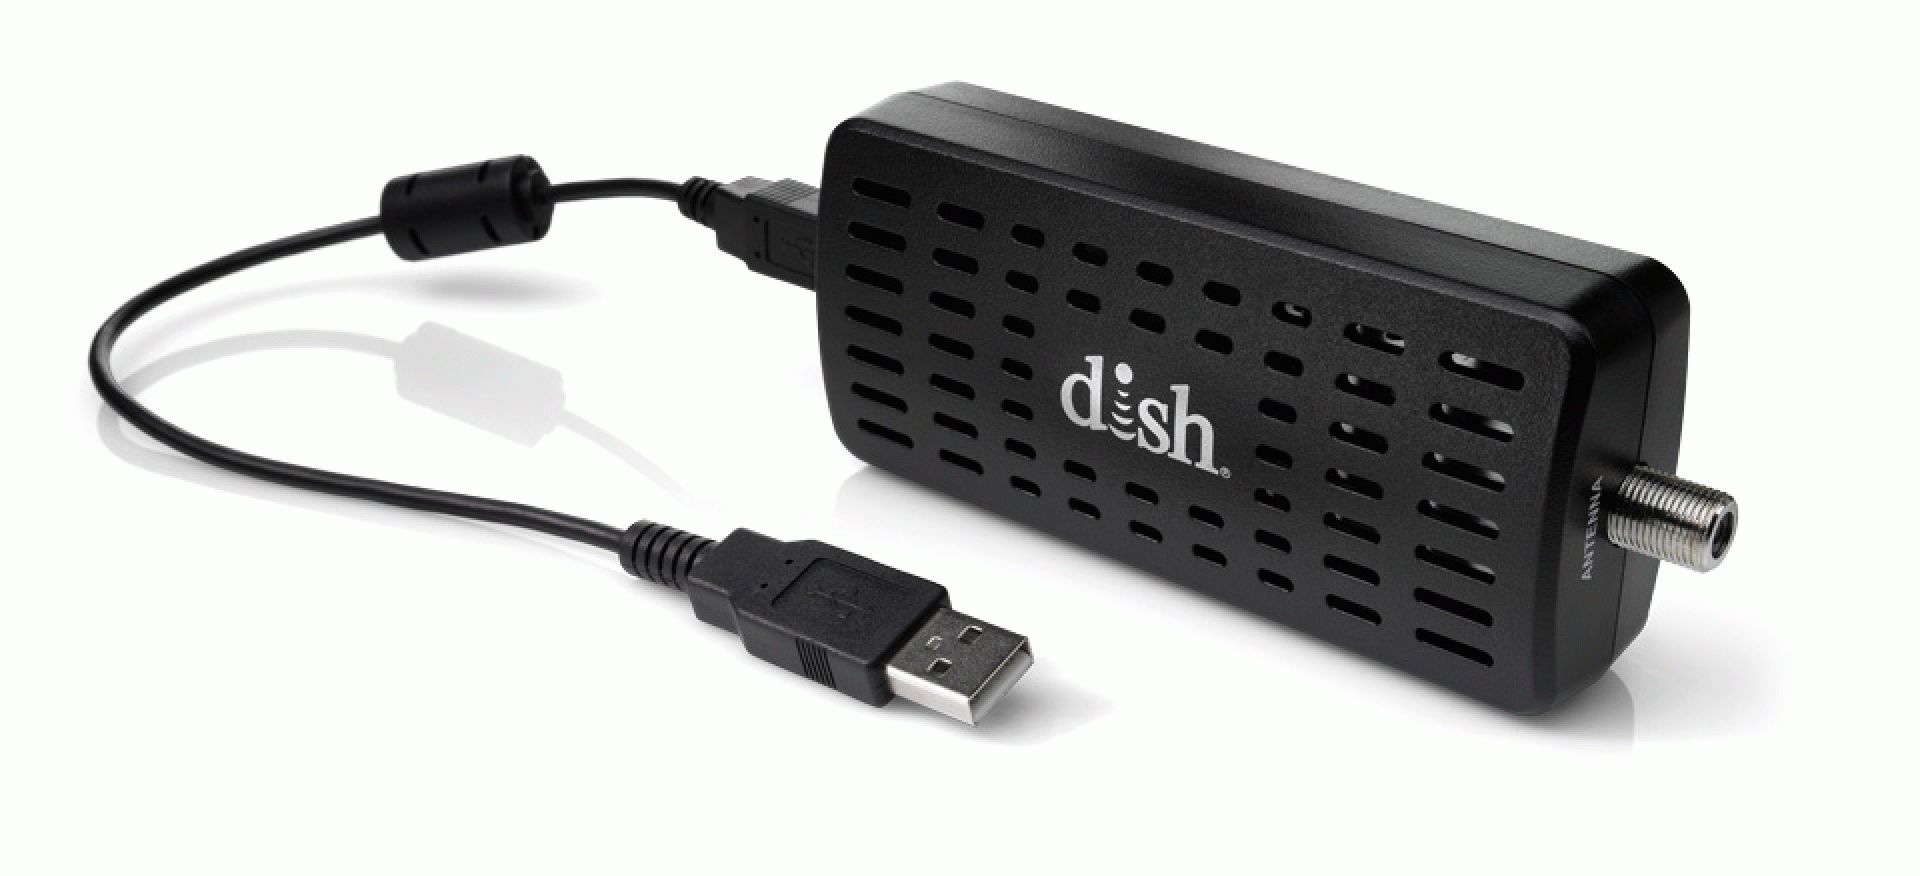 PACE INTERNATIONAL | 610-001 | DISH USB Digital Over The Air Tuner For VIP211Z